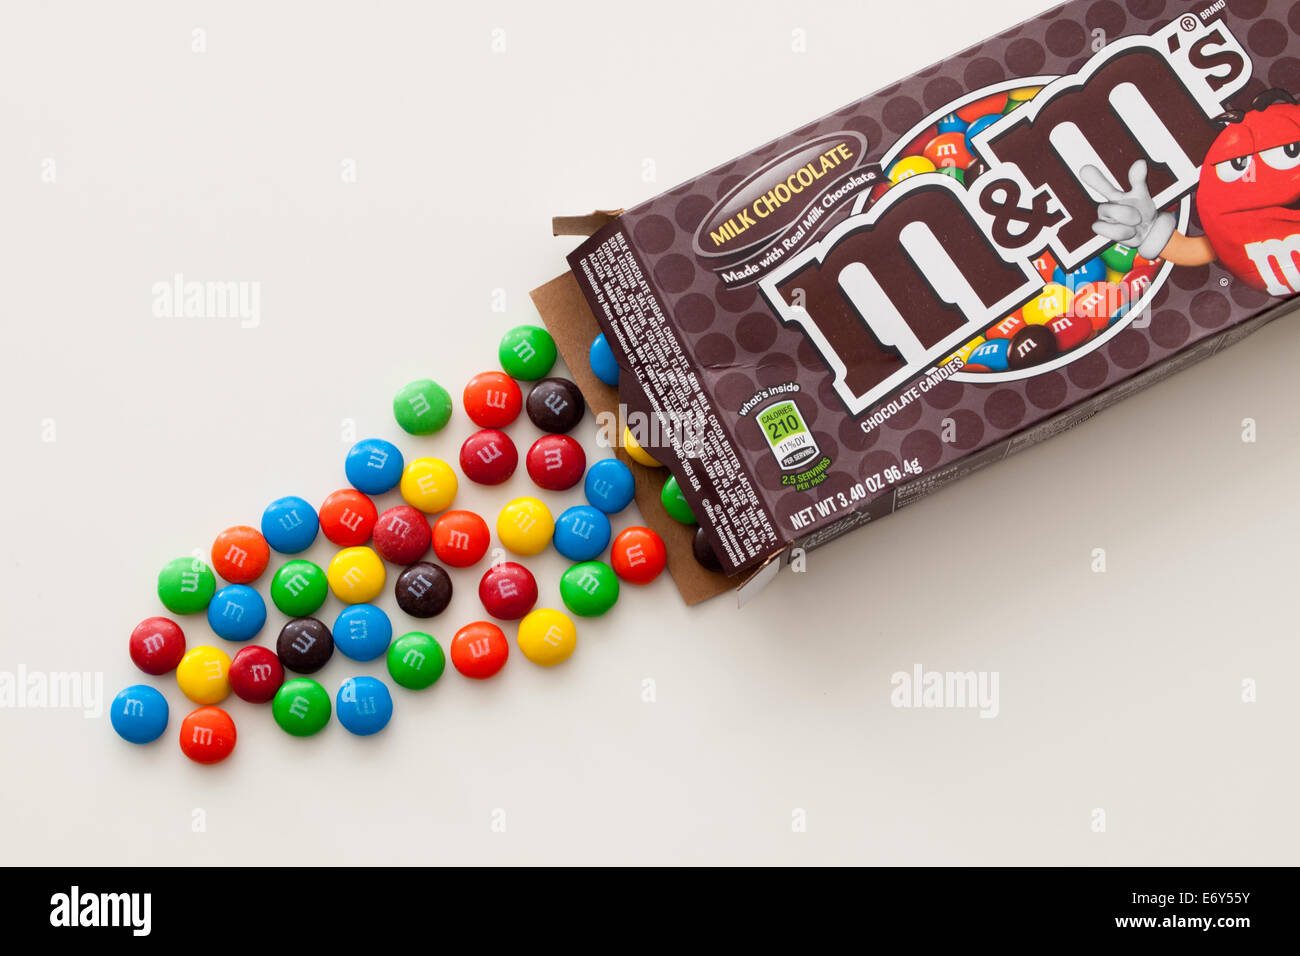 Plain" M&M's chocolate candy. Produced by Mars, Inc Stock Photo - Alamy